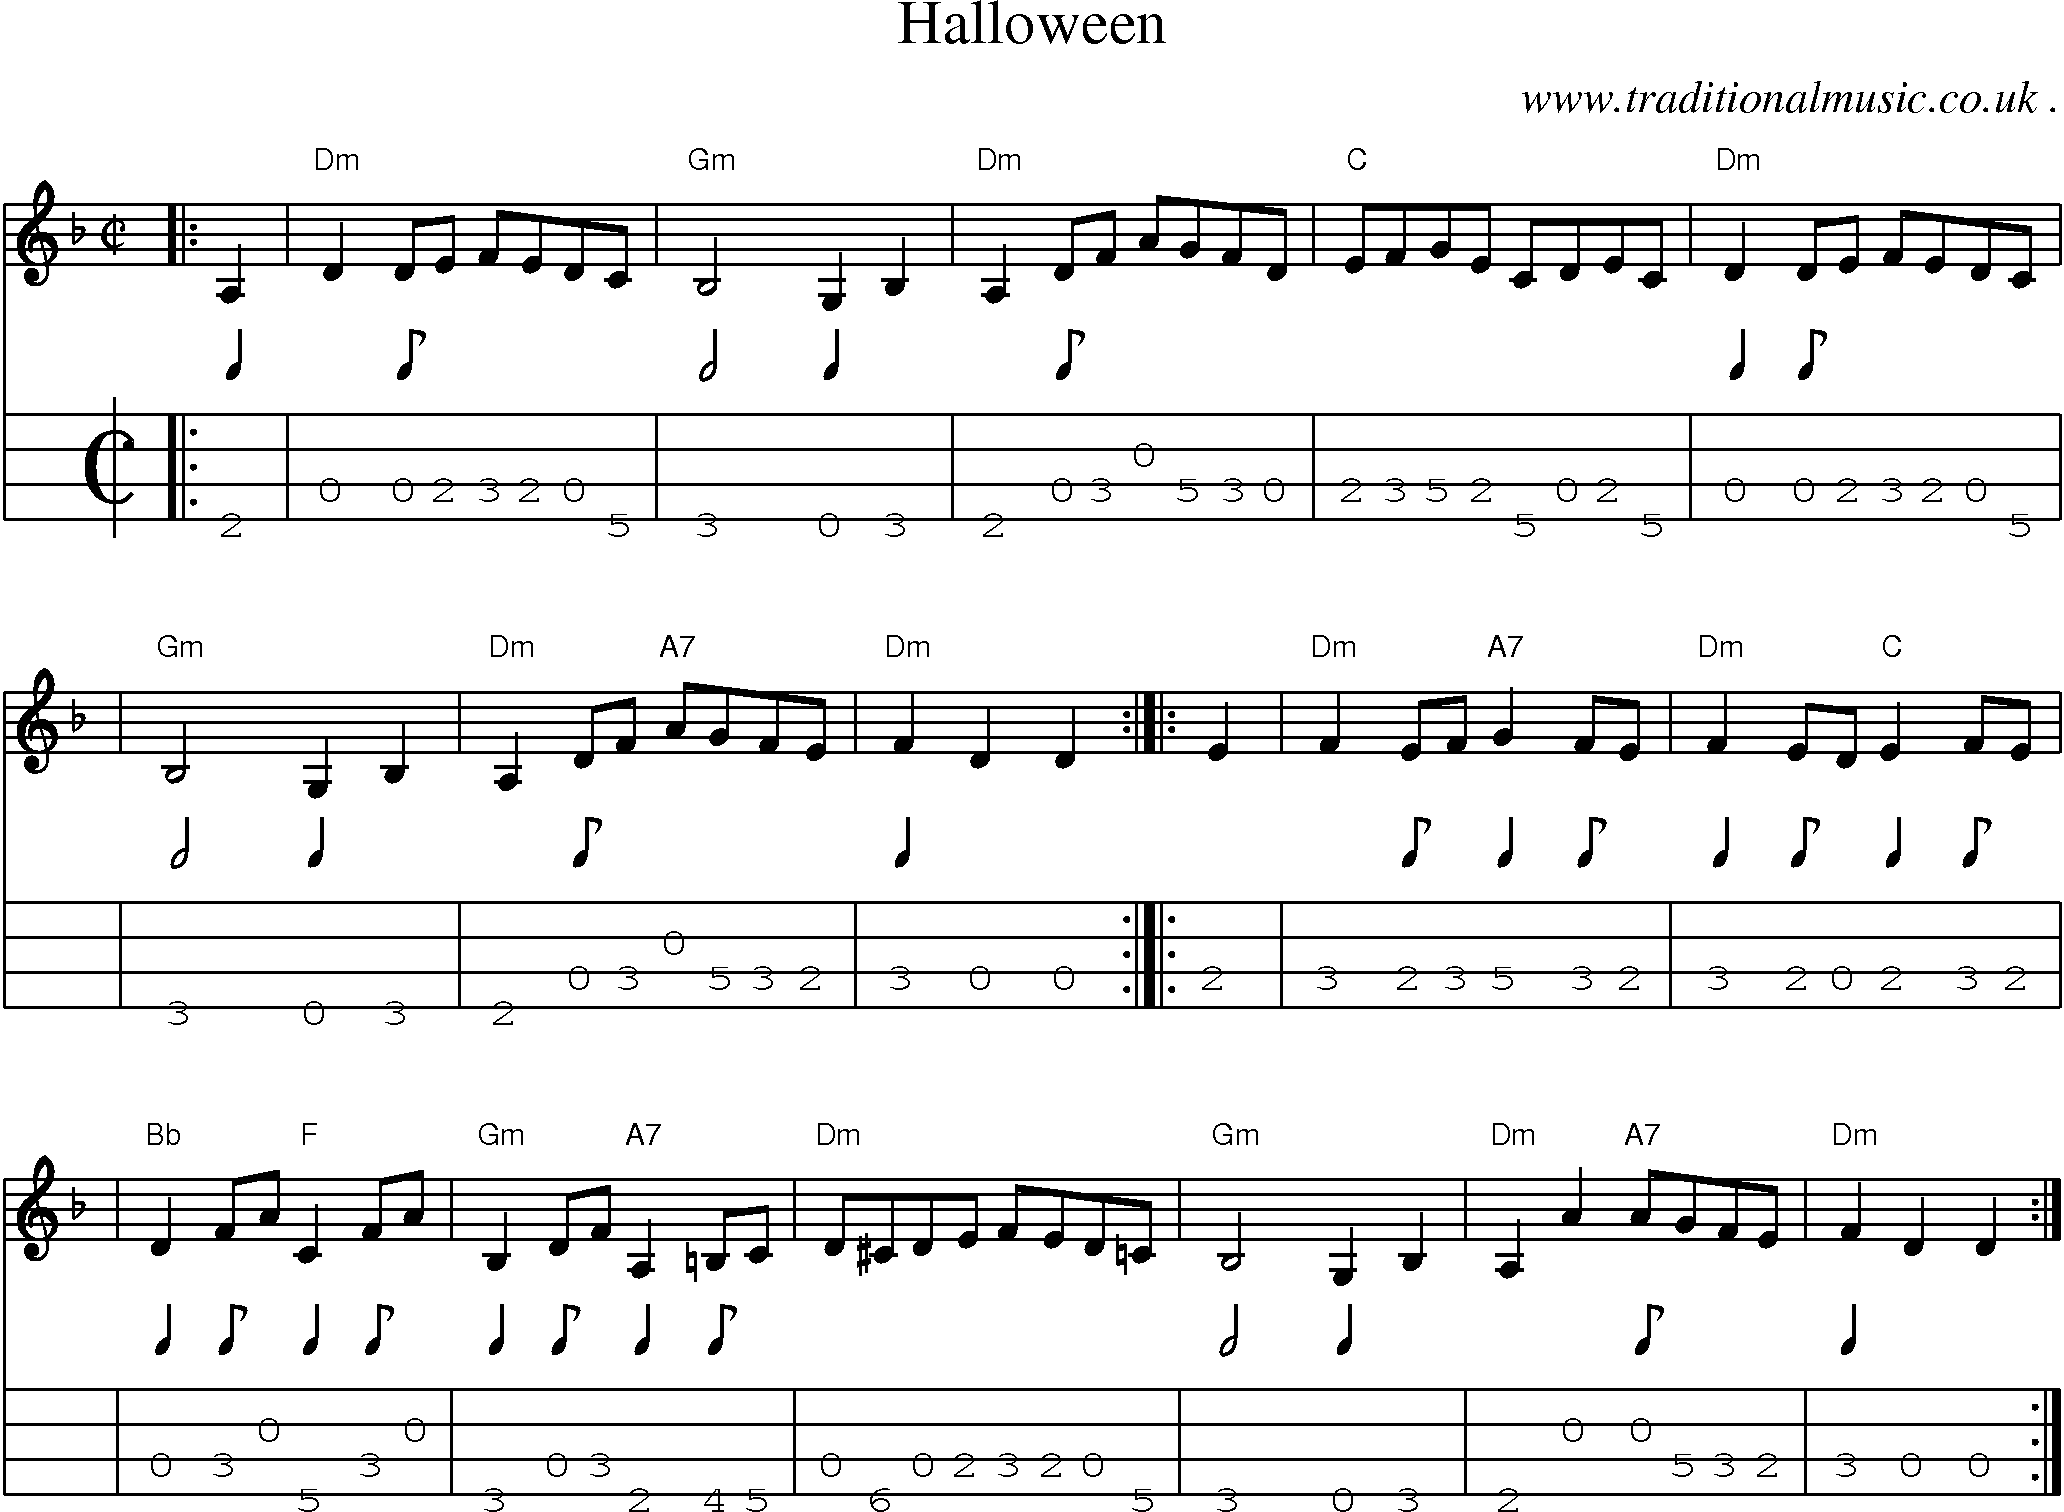 Sheet-music  score, Chords and Mandolin Tabs for Halloween